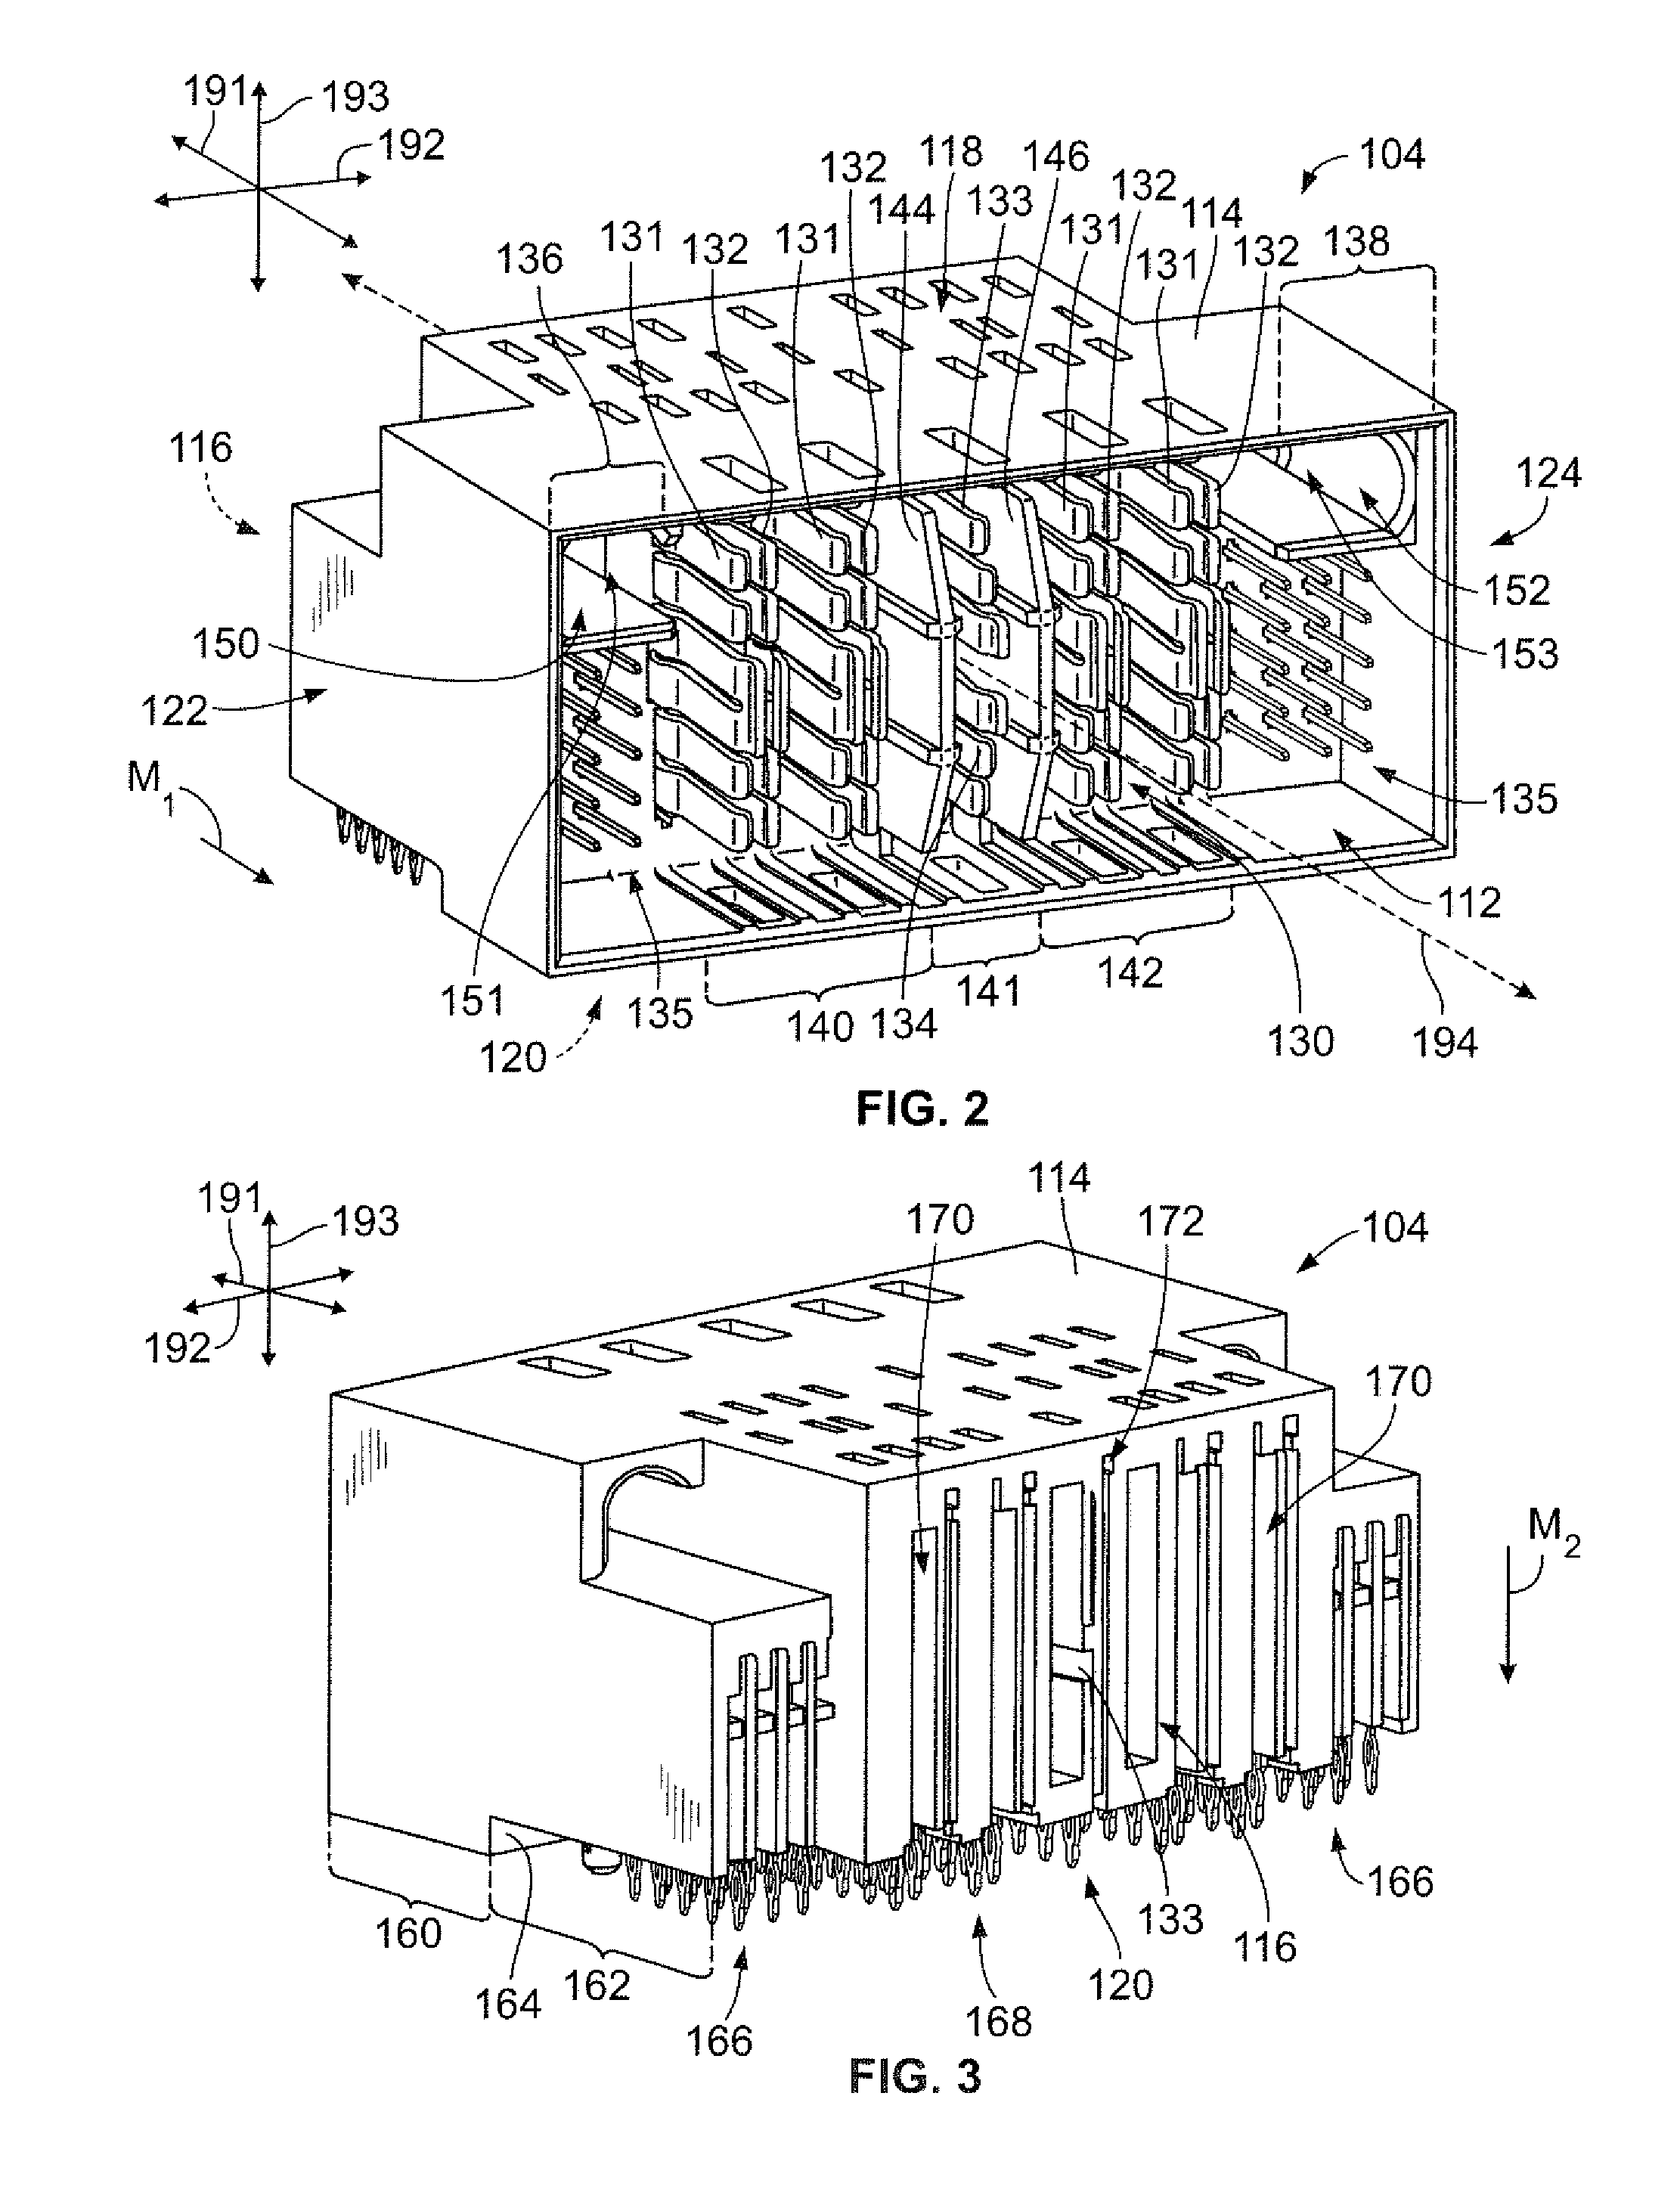 Electrical connector having an electrical contact with a plurality of contact beams